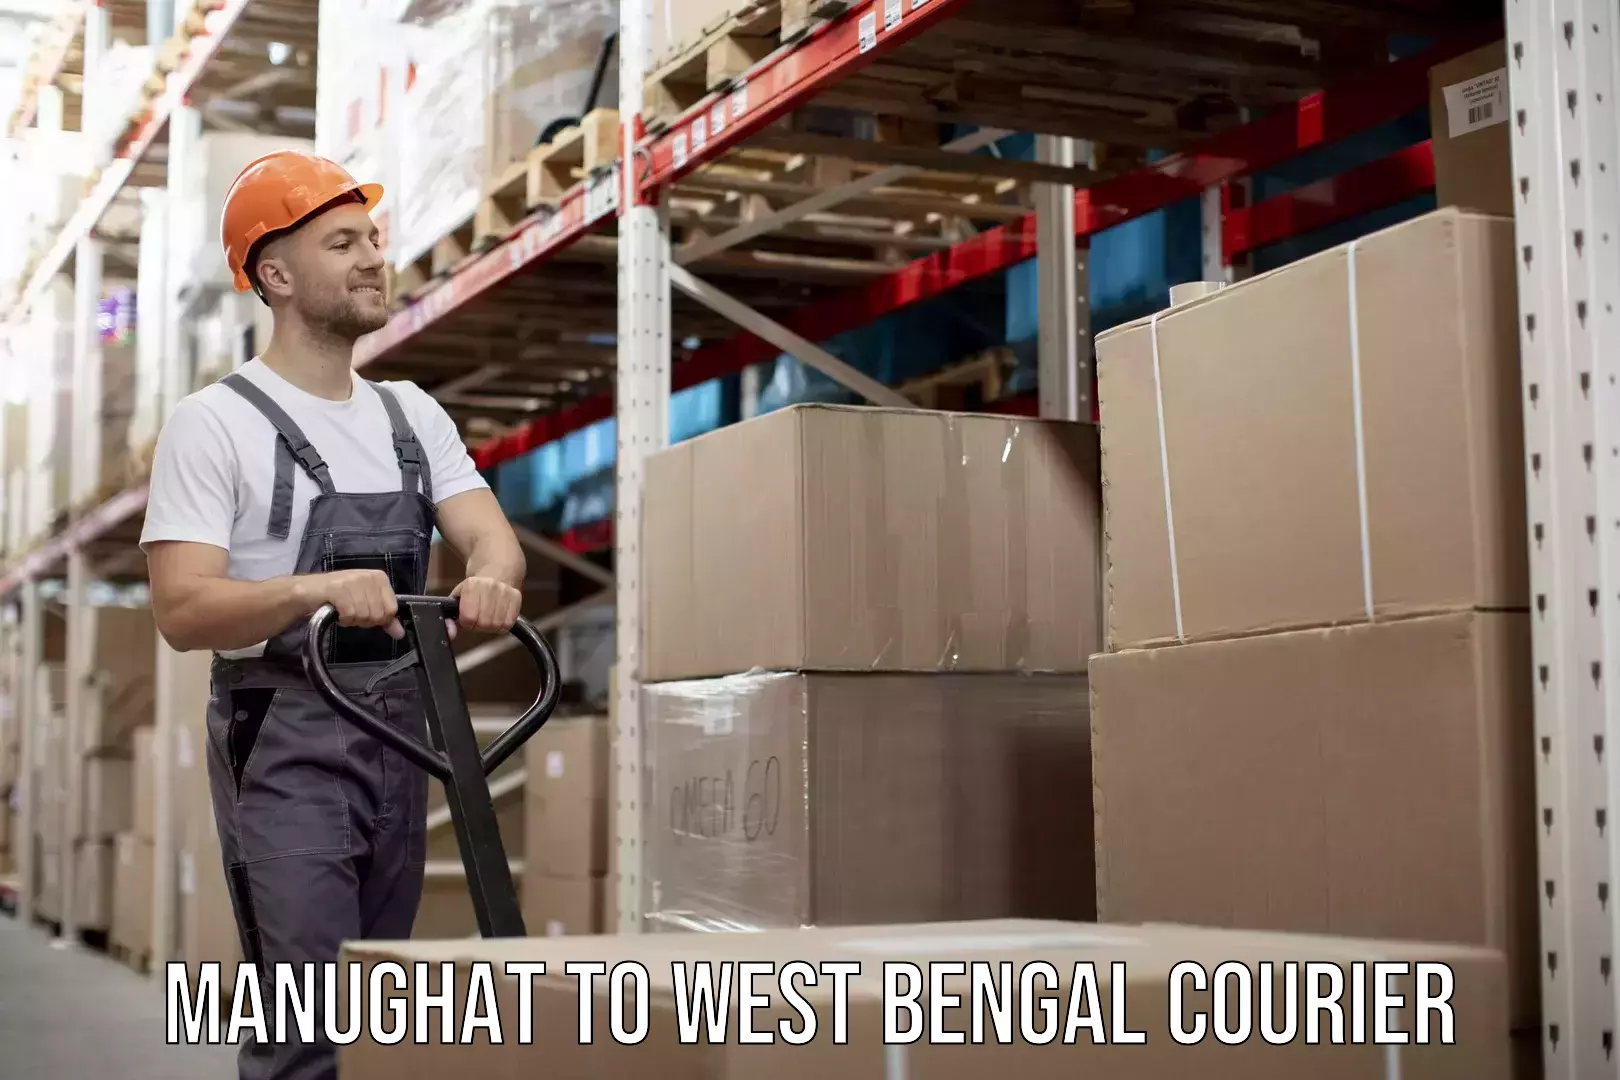 Subscription-based courier Manughat to West Bengal